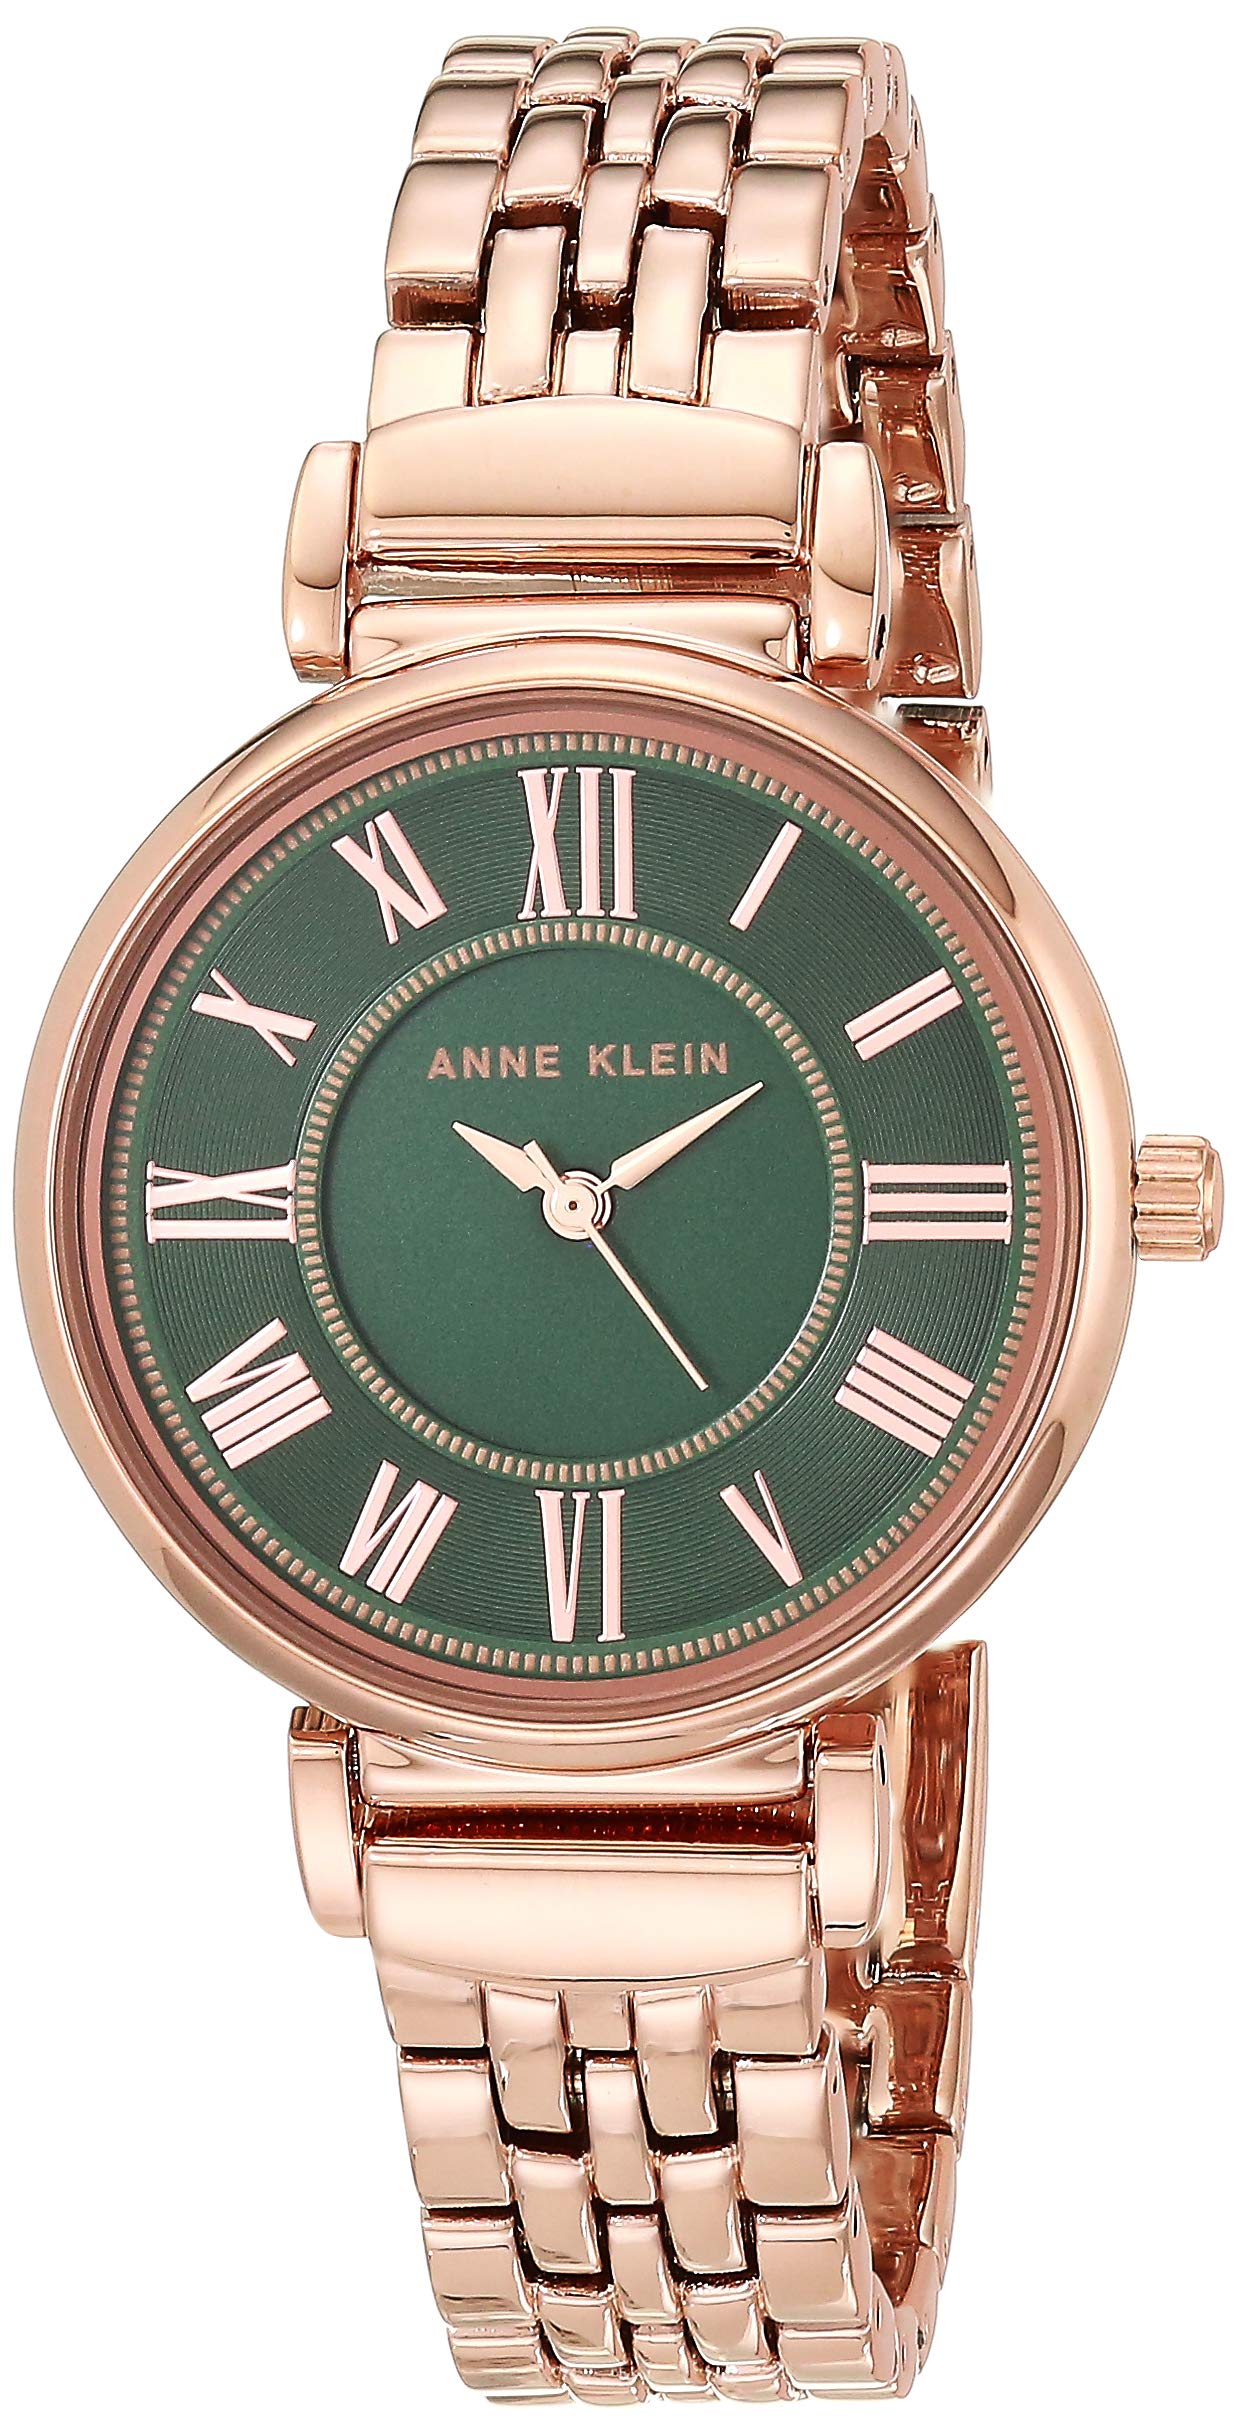 Anne Klein Women's AK/2158GNRG Rose Gold-Tone Bracelet Watch $24.49 (Free delivery over $25 or Prime)